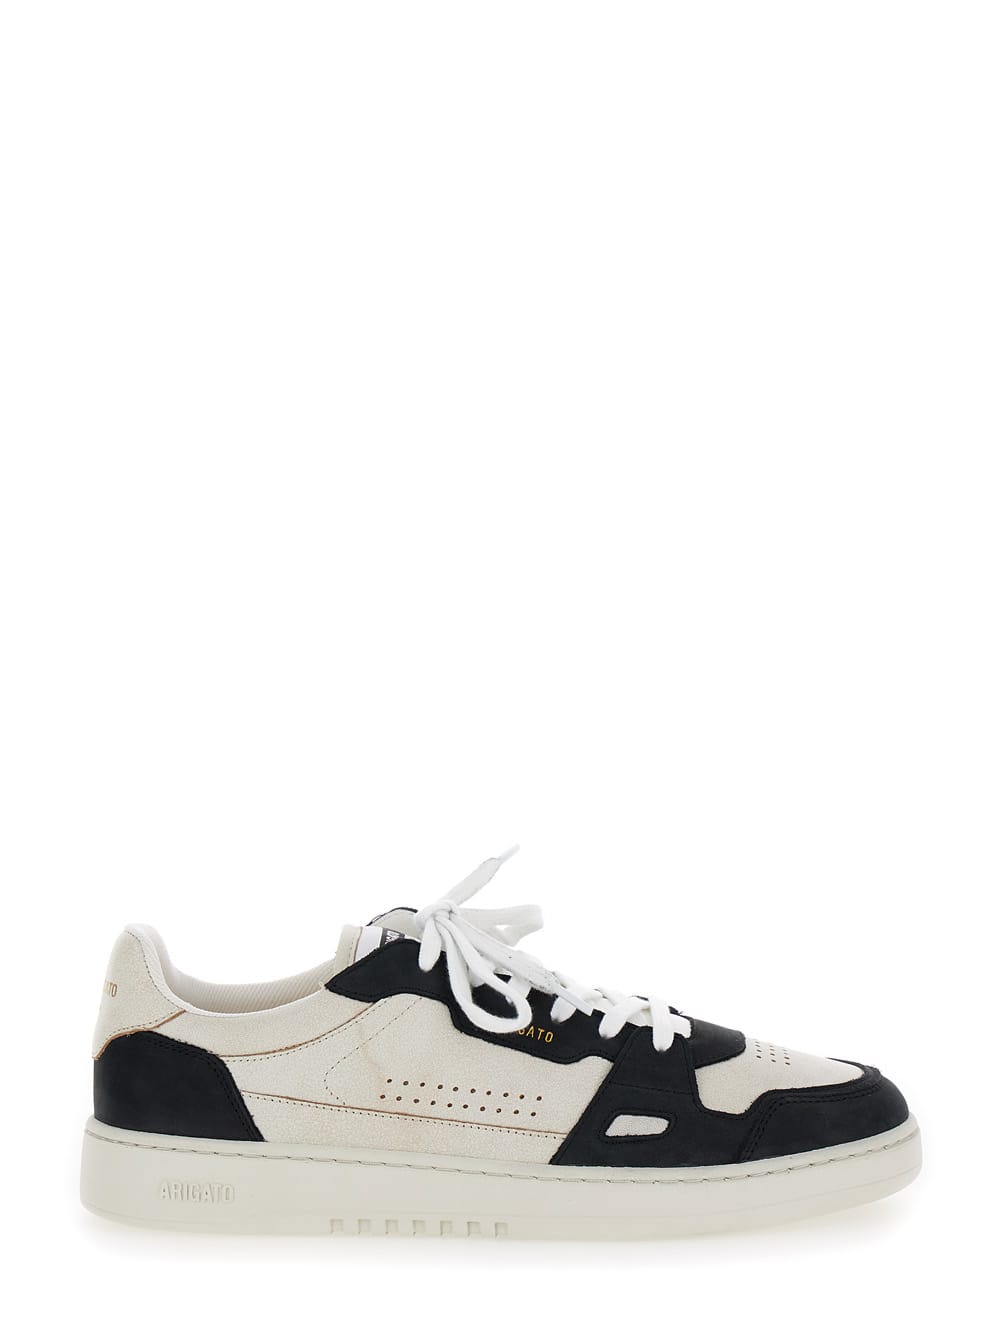 dice Lo Black And Beige Two-tone Sneakers In Calf Leather Man